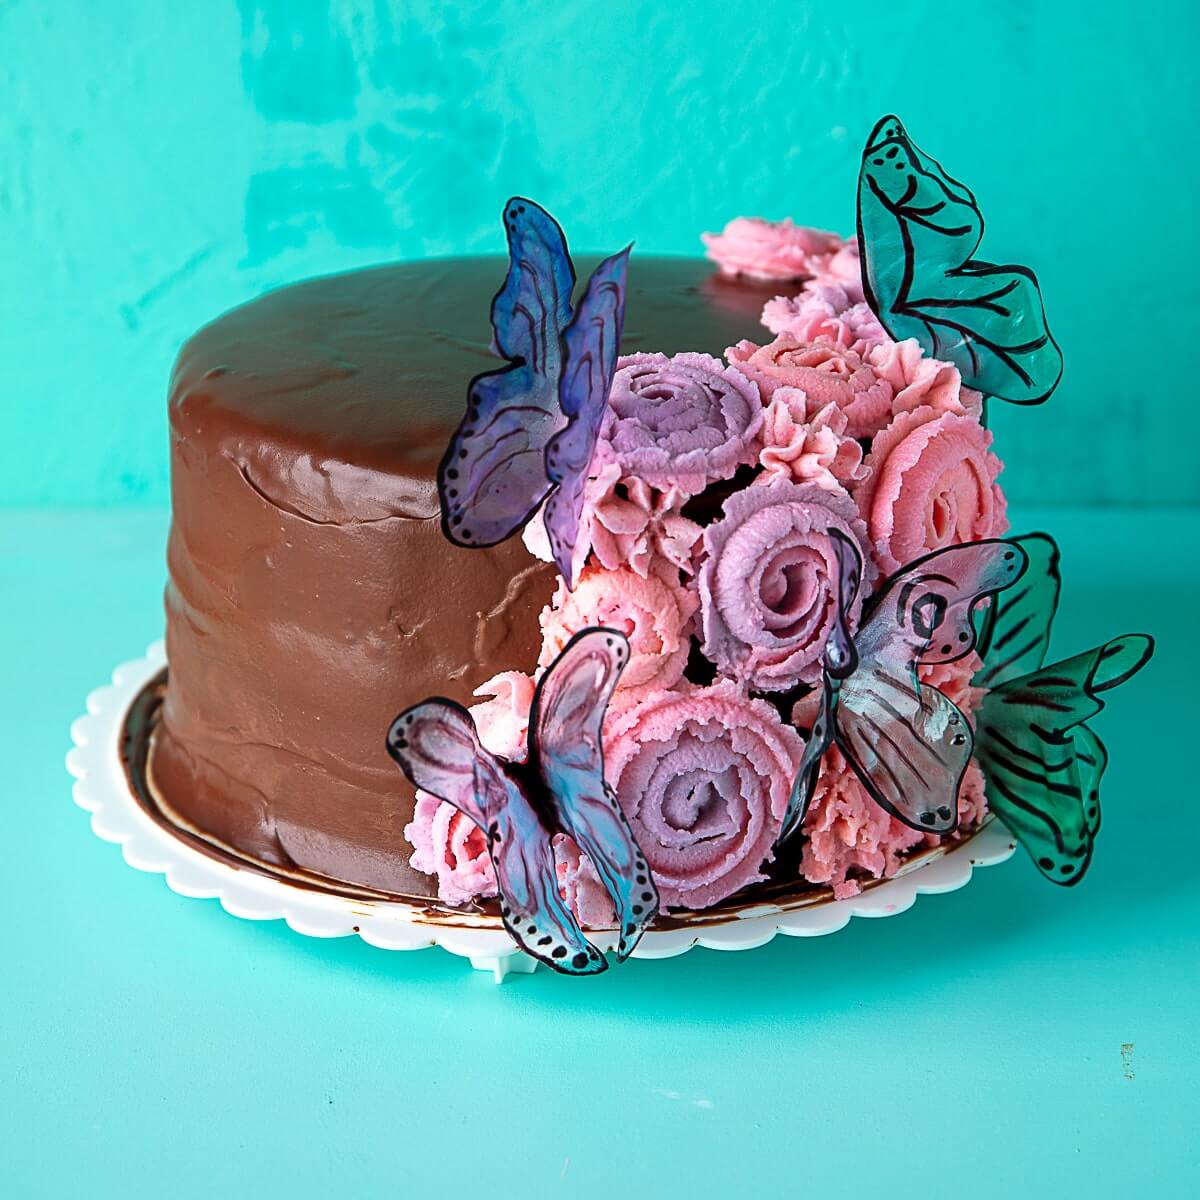 vegan ding dong cake decorated with flowers and butterflies